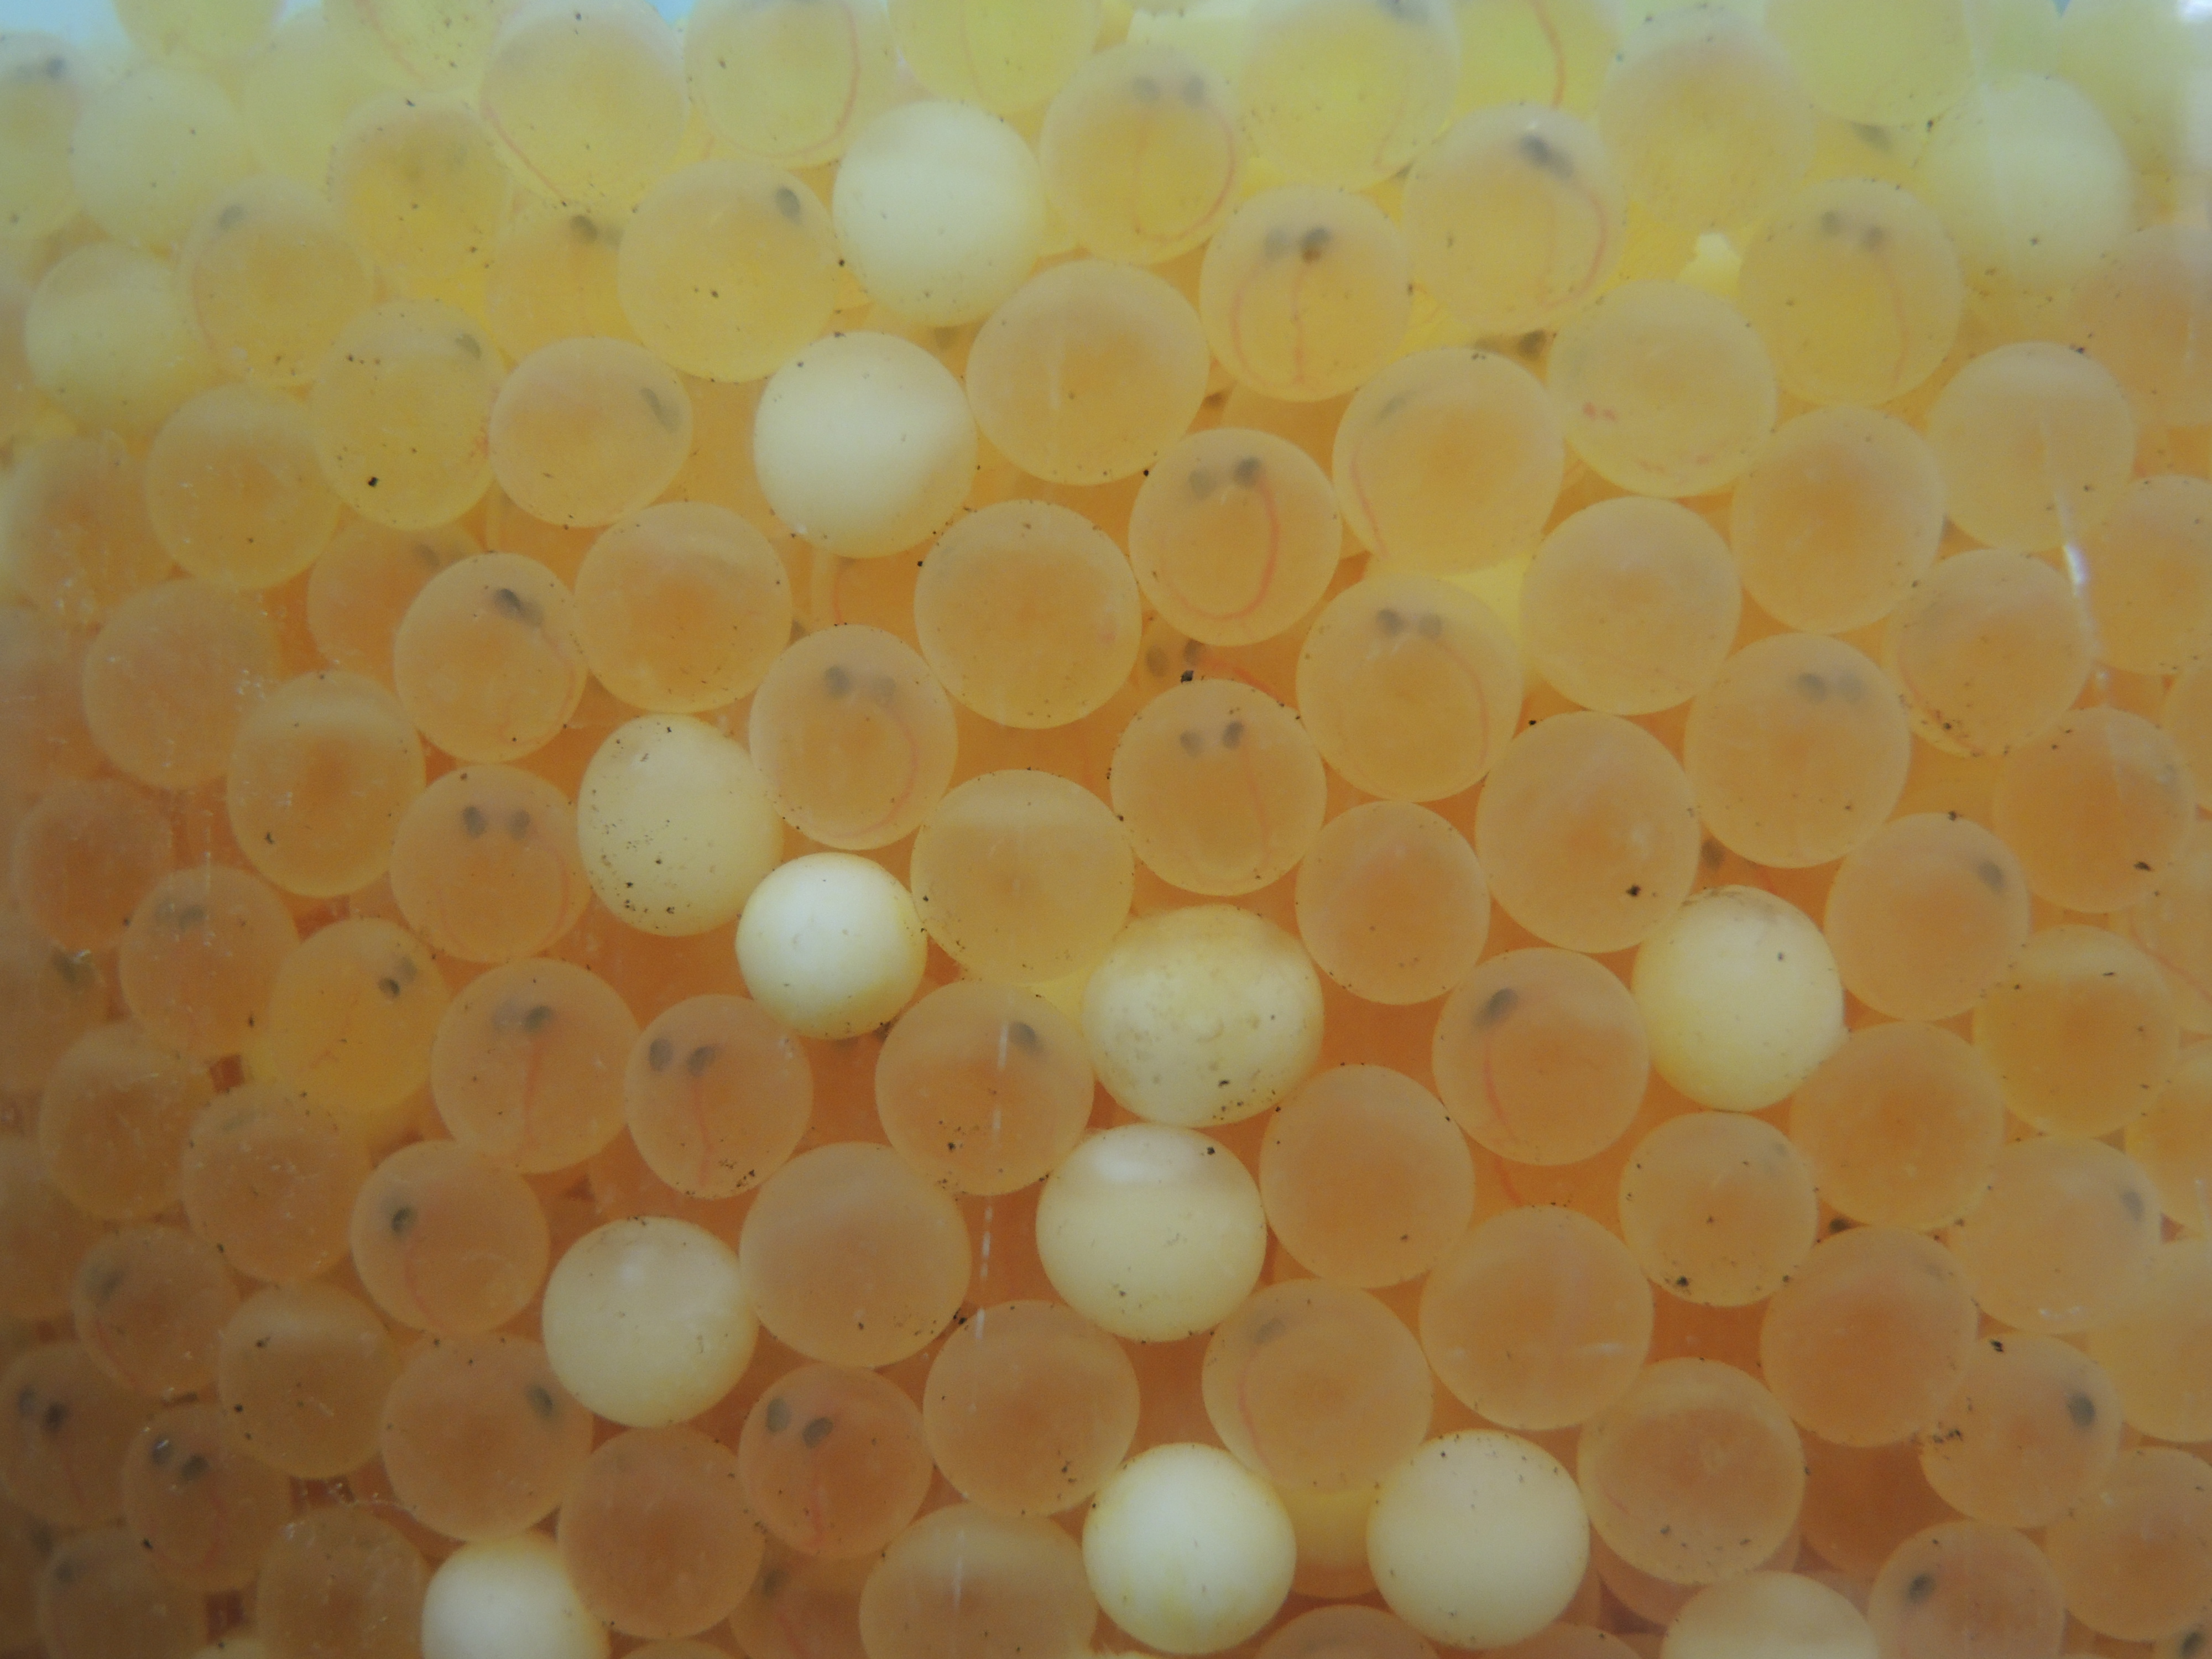 This container holds fertilized brook trout eggs that have eyed up. The white eggs are dead, and will be removed.